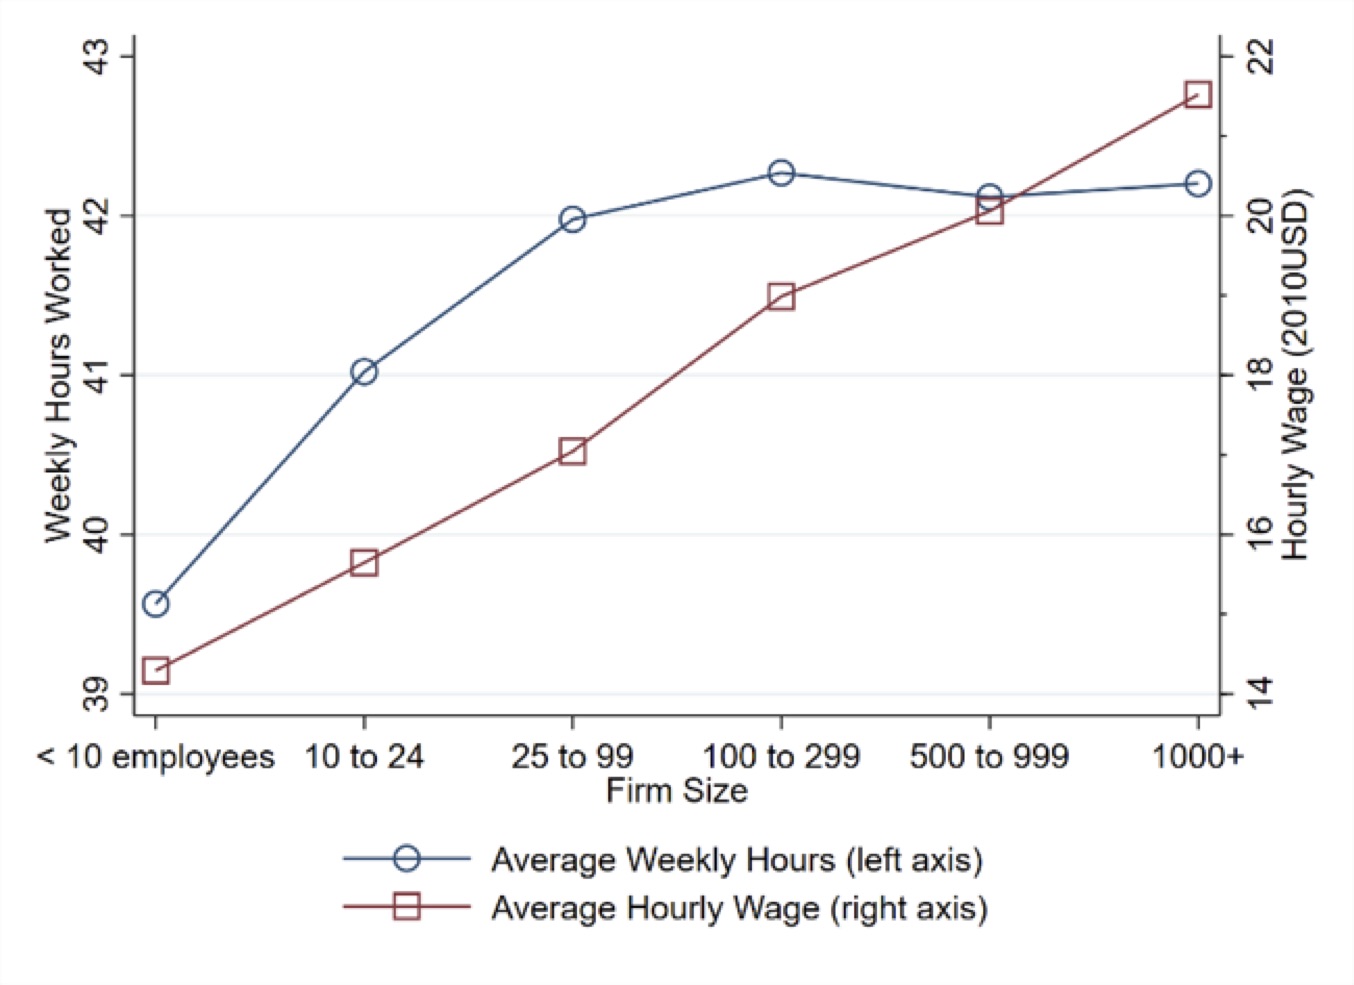 Figure 1: Average working hours and hourly wage across firm size in the US